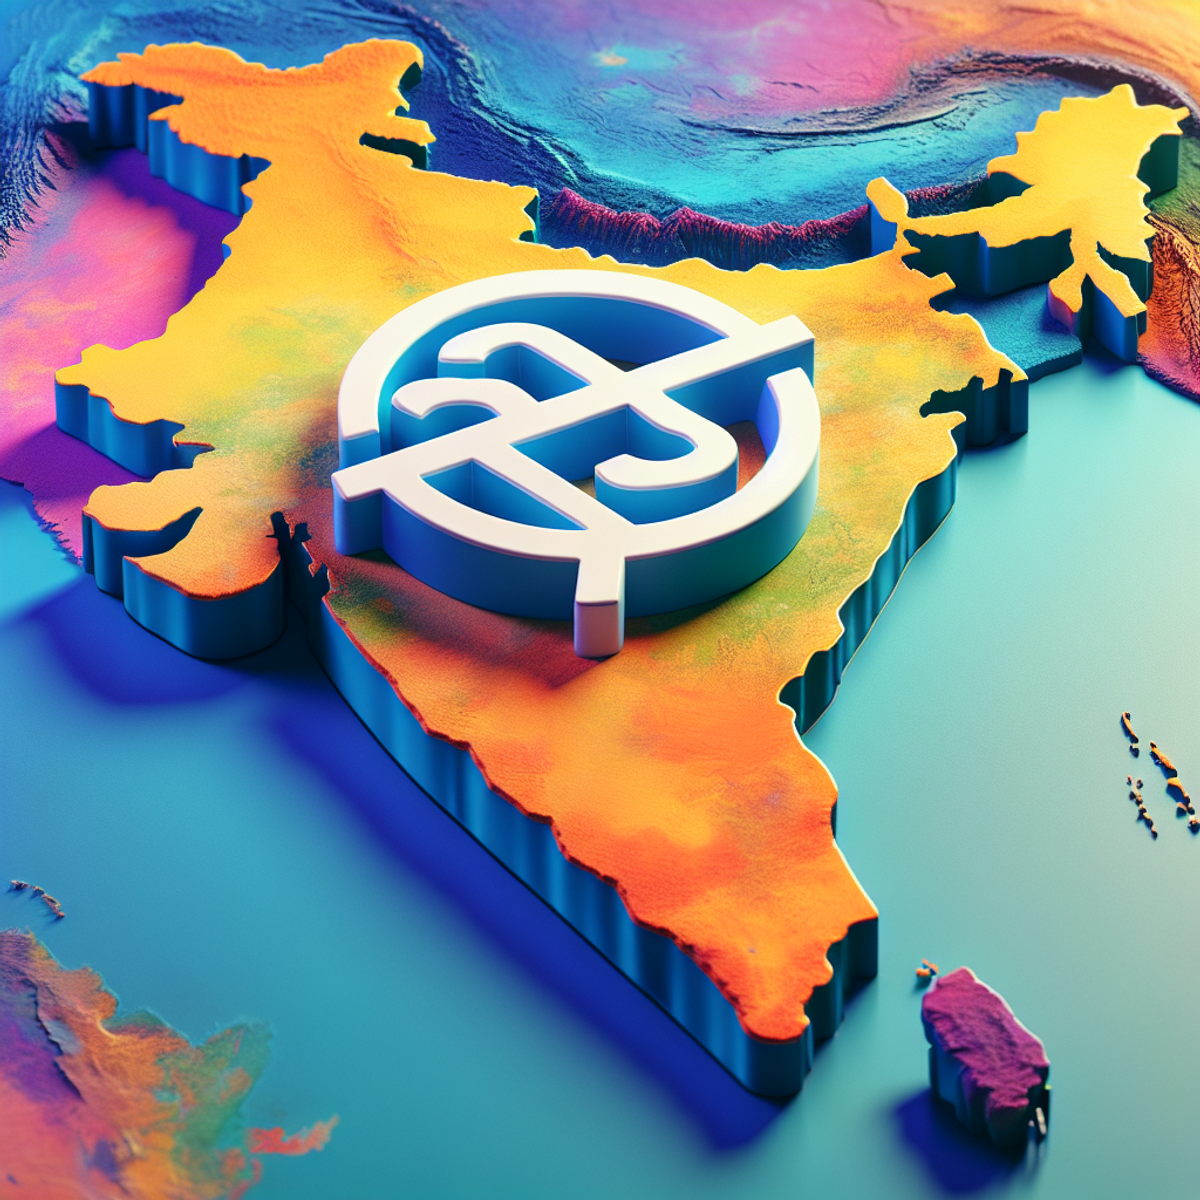 Alt text: A detailed map of India with a prominent, symbolic bank logo superimposed on it, featuring vibrant colors and intricate details.